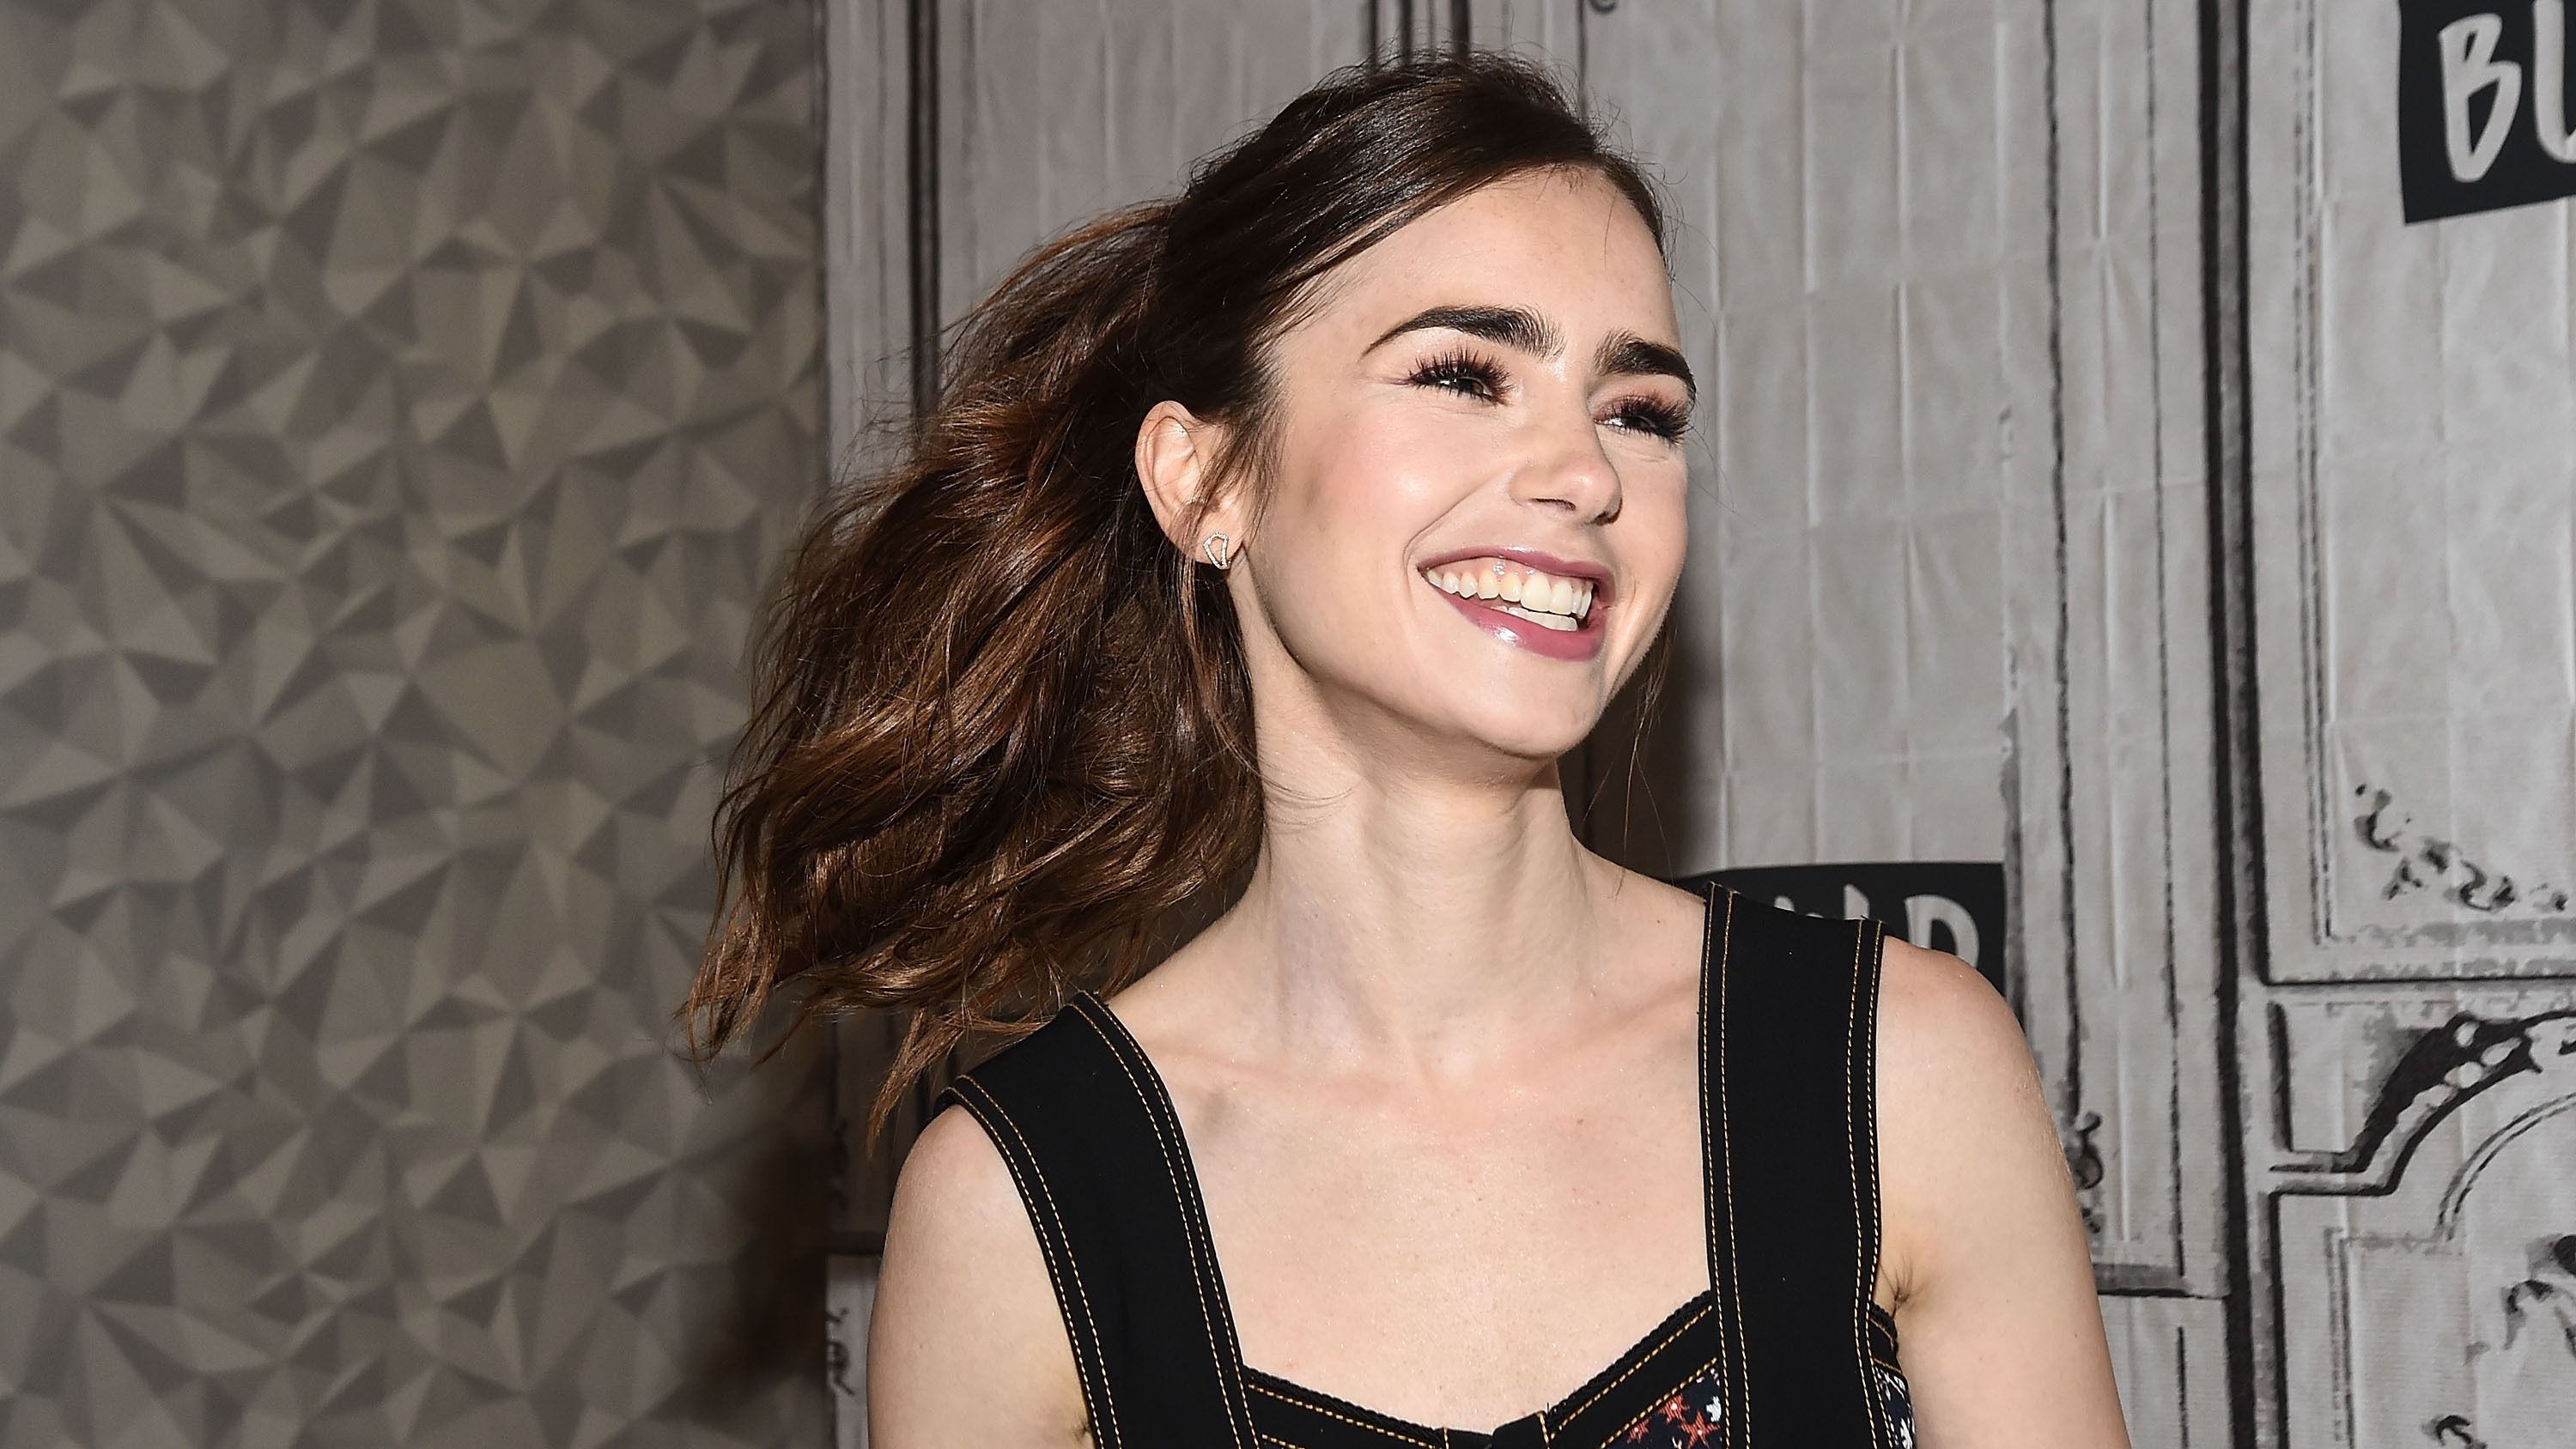 Lily Collins is seen leaving the 'CHANEL' Cambon store on July 9